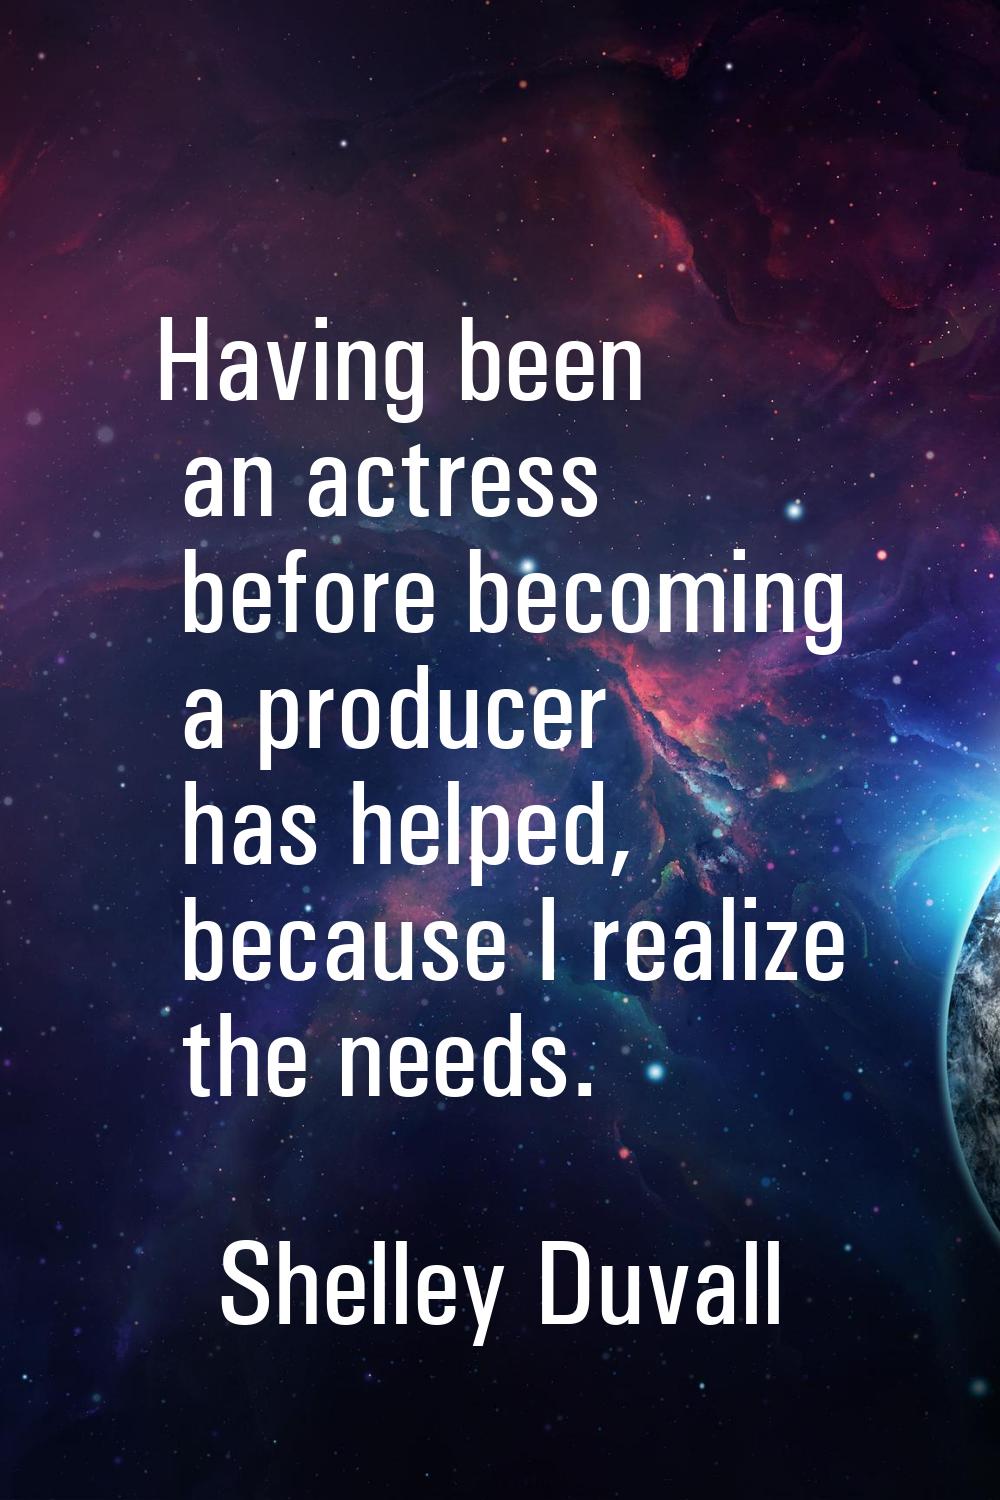 Having been an actress before becoming a producer has helped, because I realize the needs.